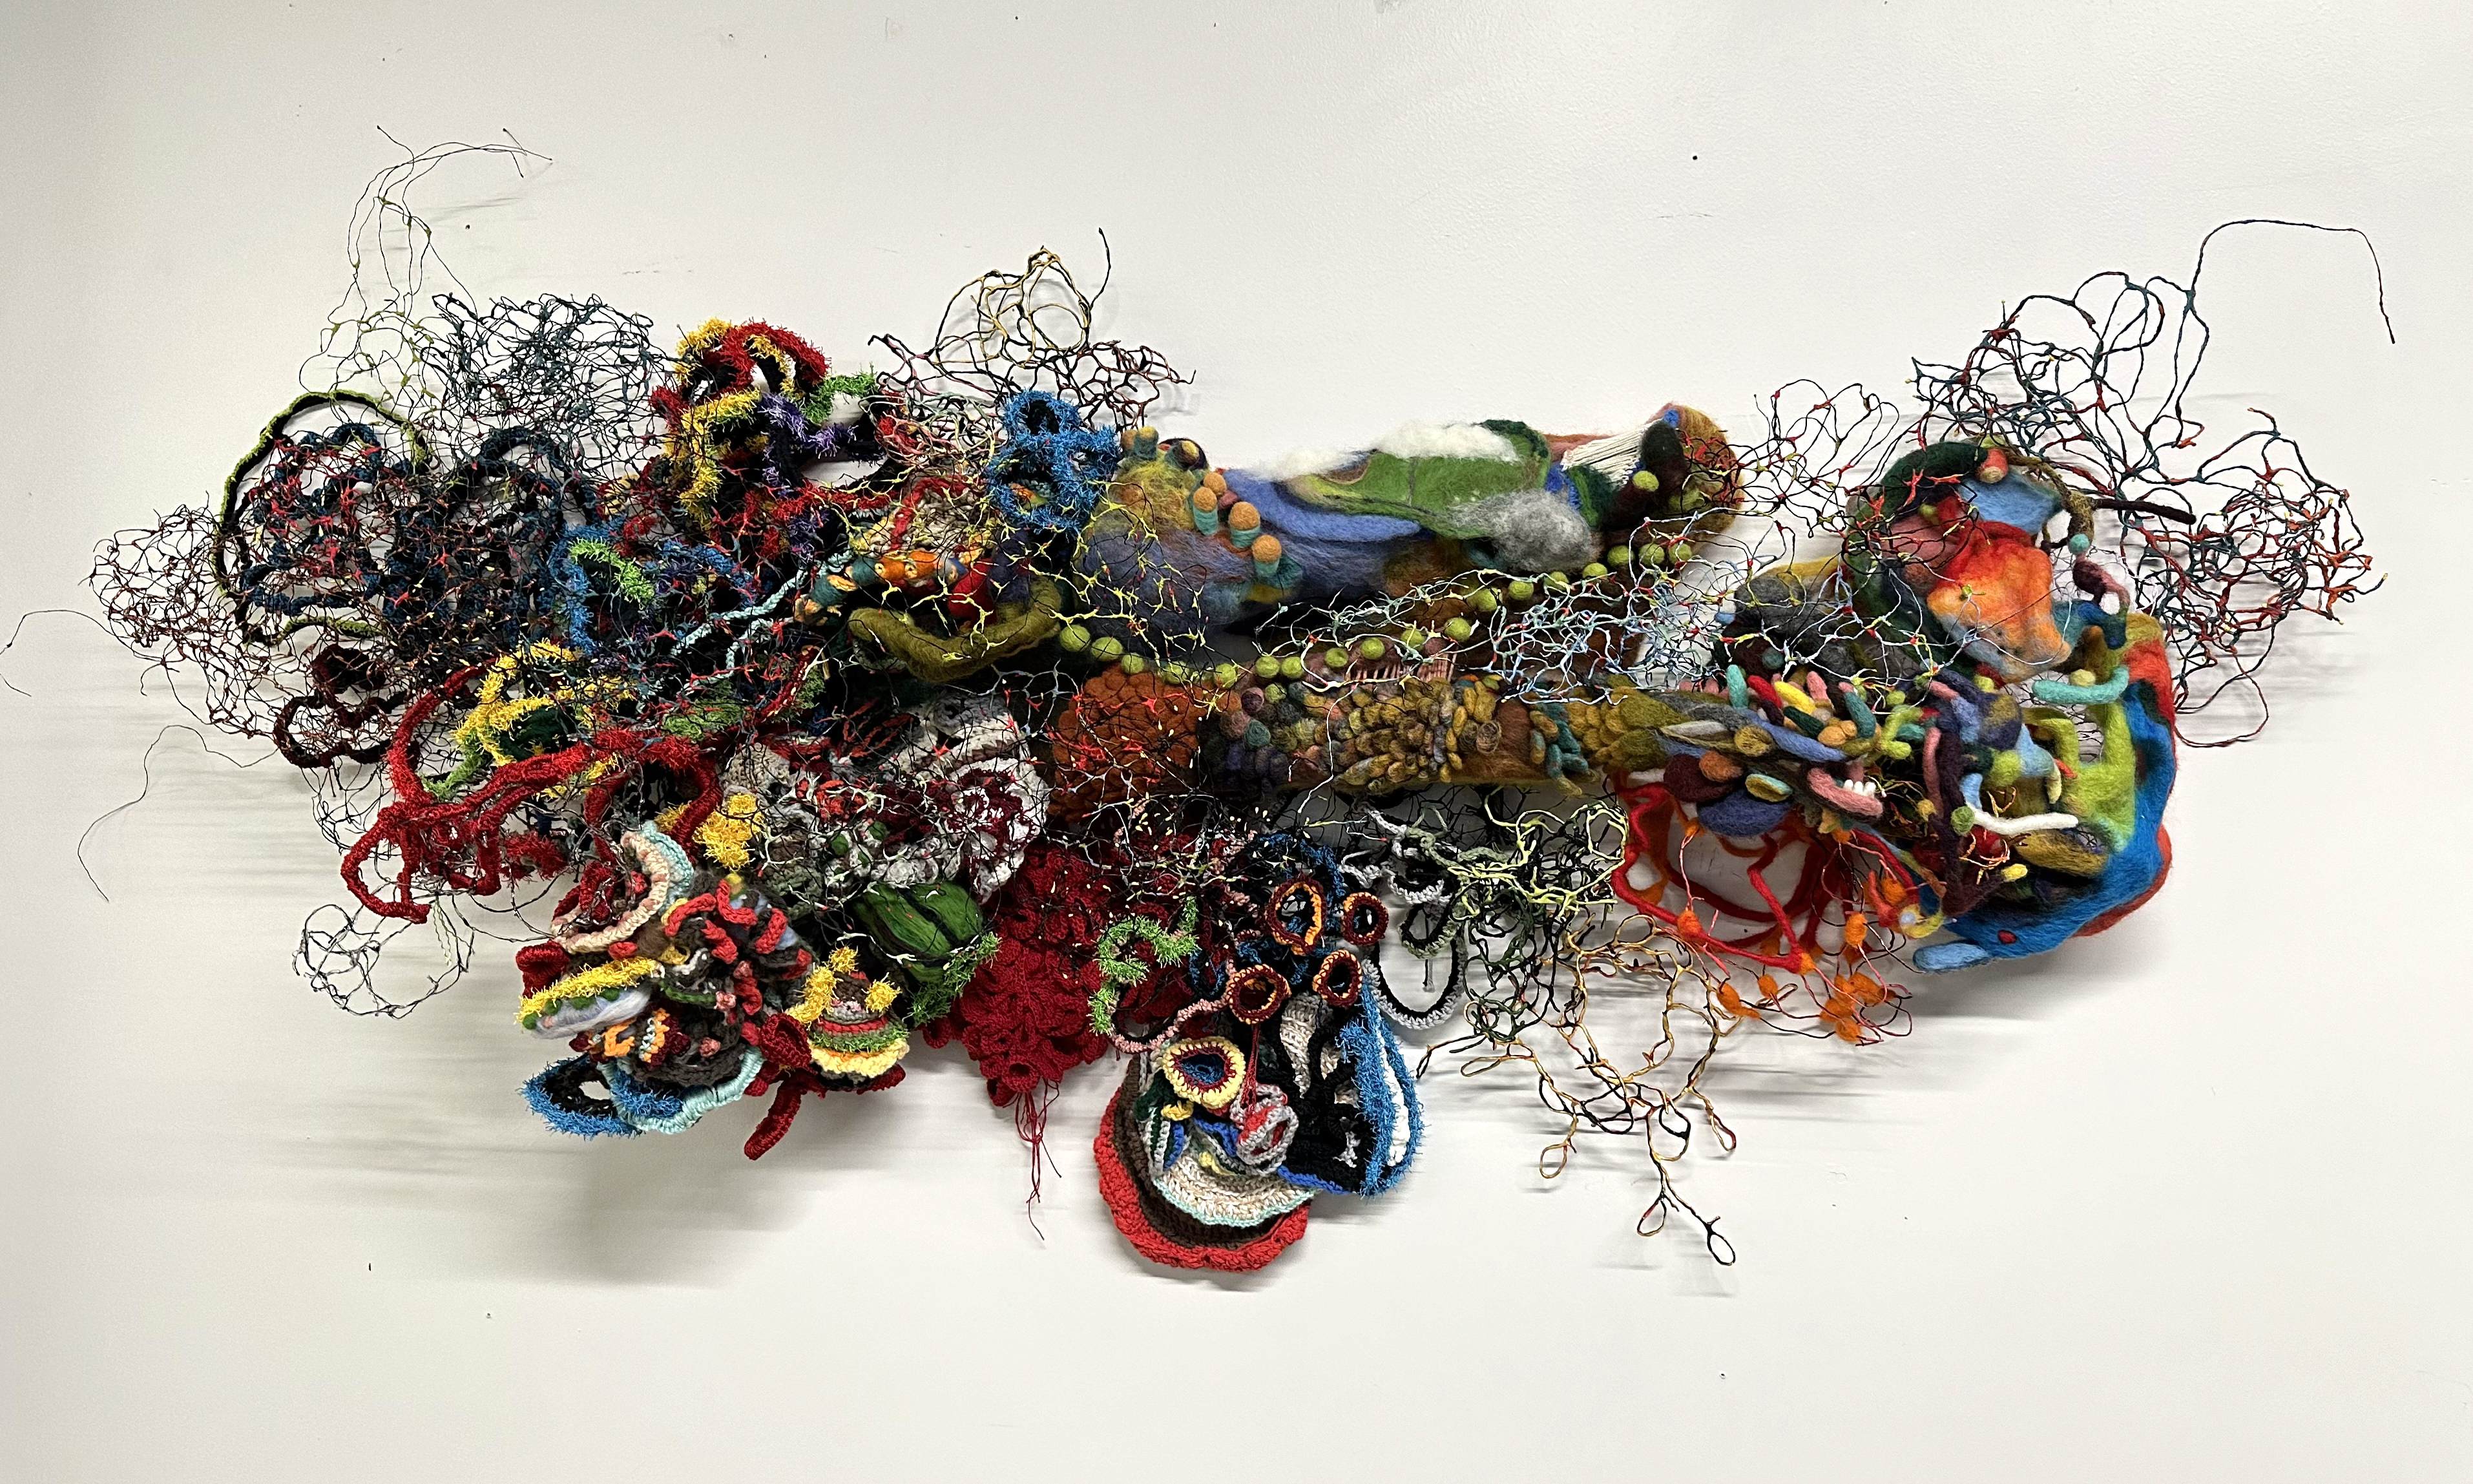 an art piece composed of various colors and fabric materials